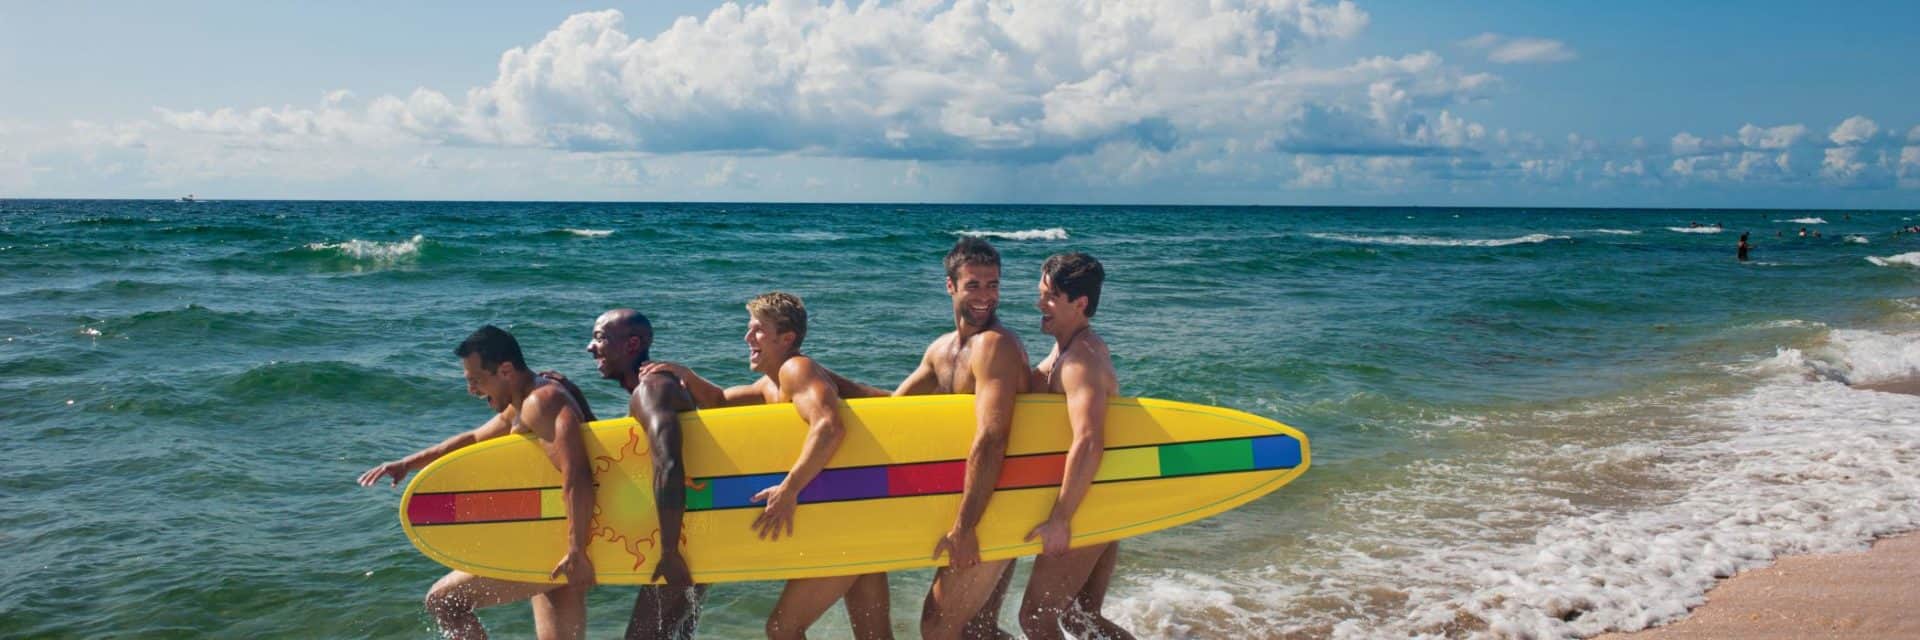 Vacanze gay a Fort Lauderdale